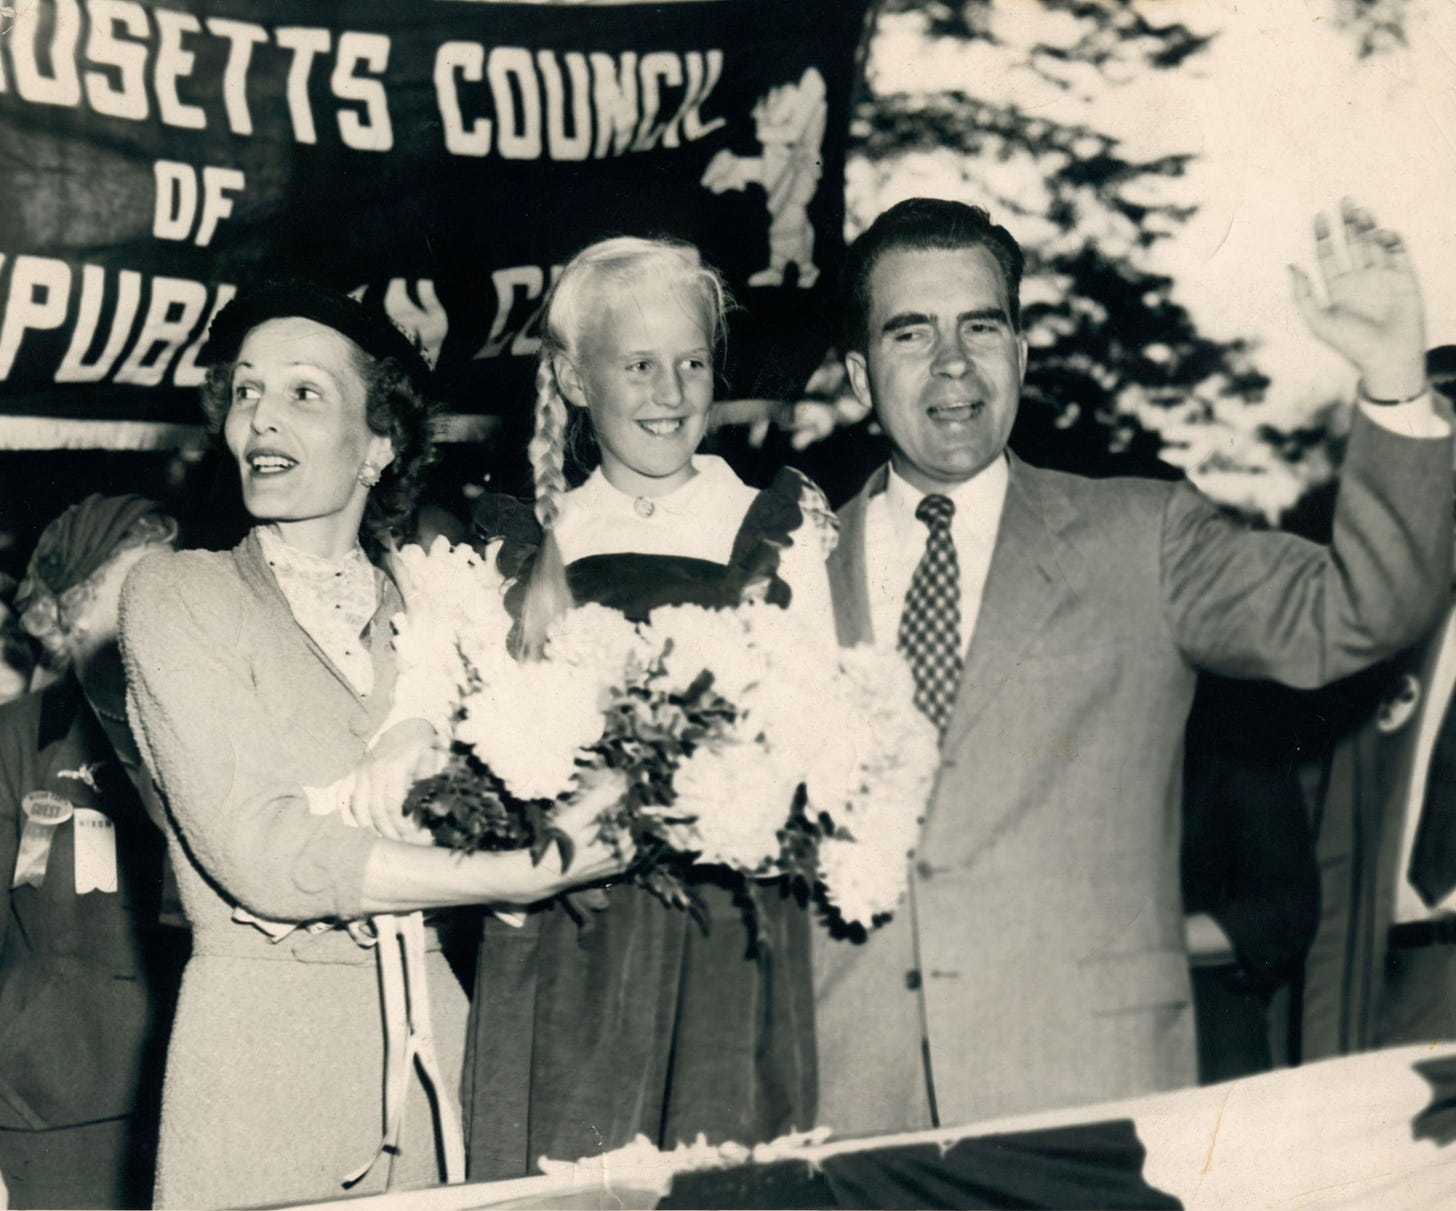 A slightly yellowed black-and-white photo of a smiling blonde ten-year-old girl holding a bouquet of flowers between Pat and Richard Nixon.